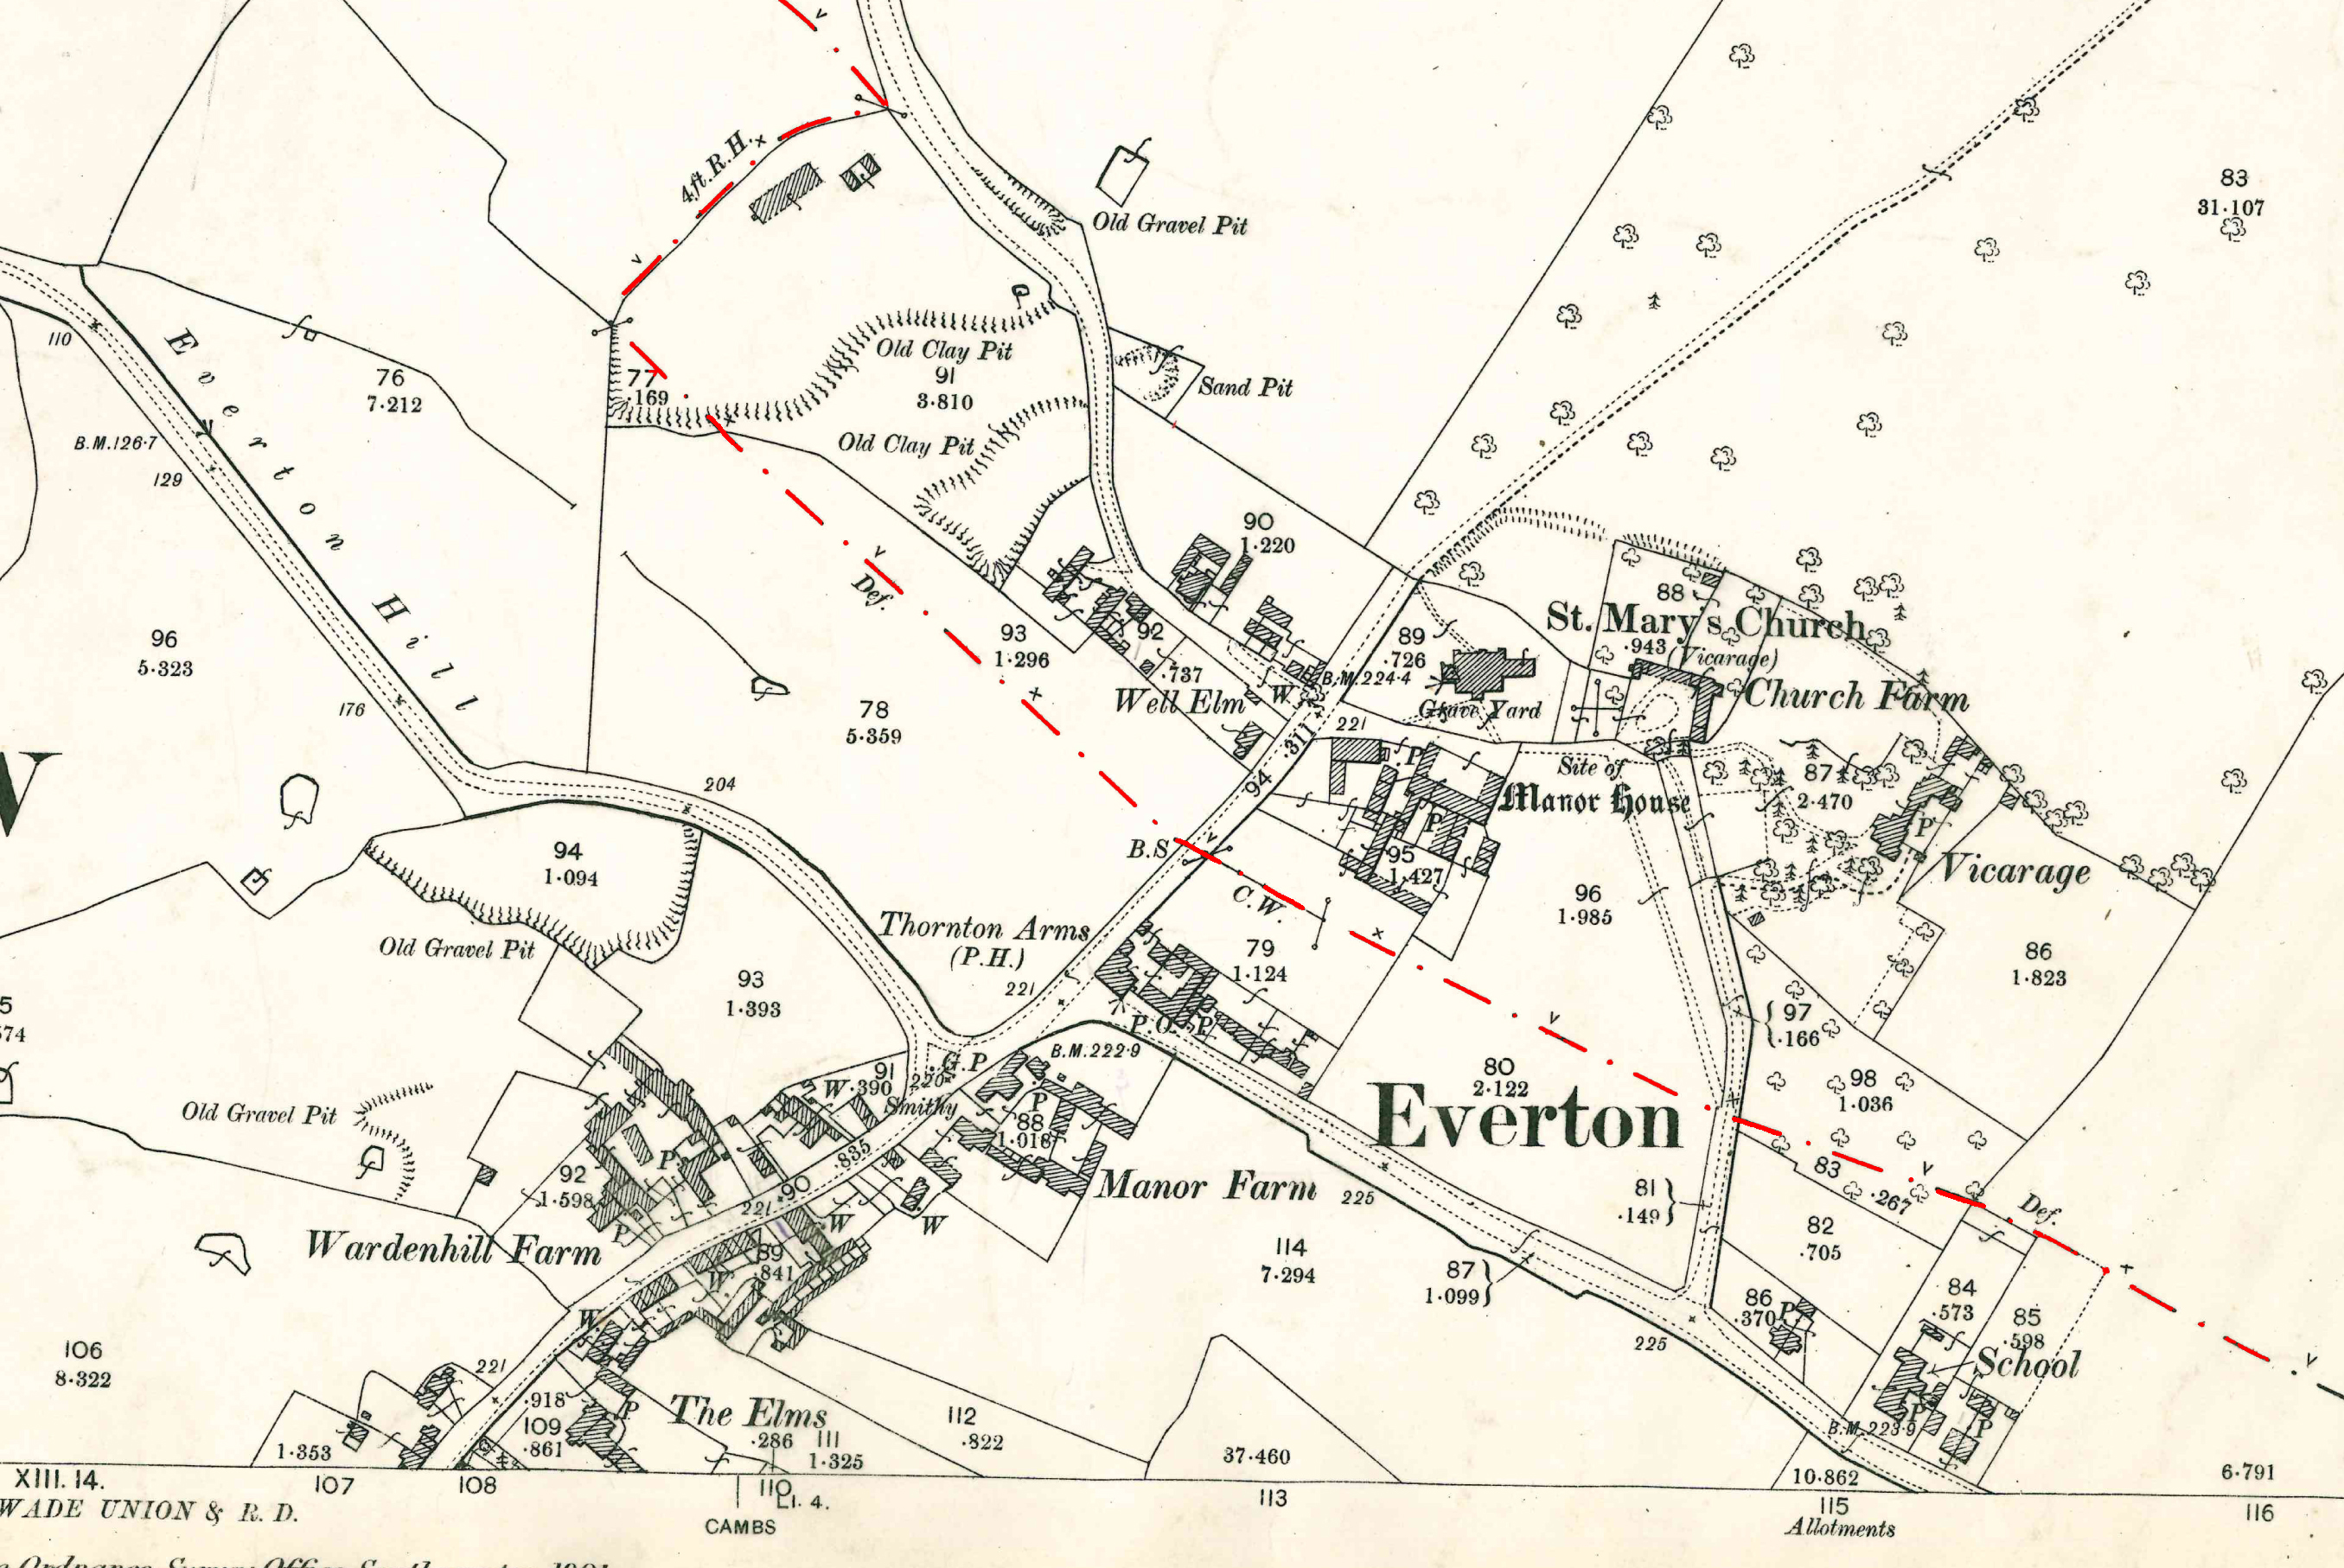 The Village Of Everton In 1901 Note The County Boundary Shown In Red 